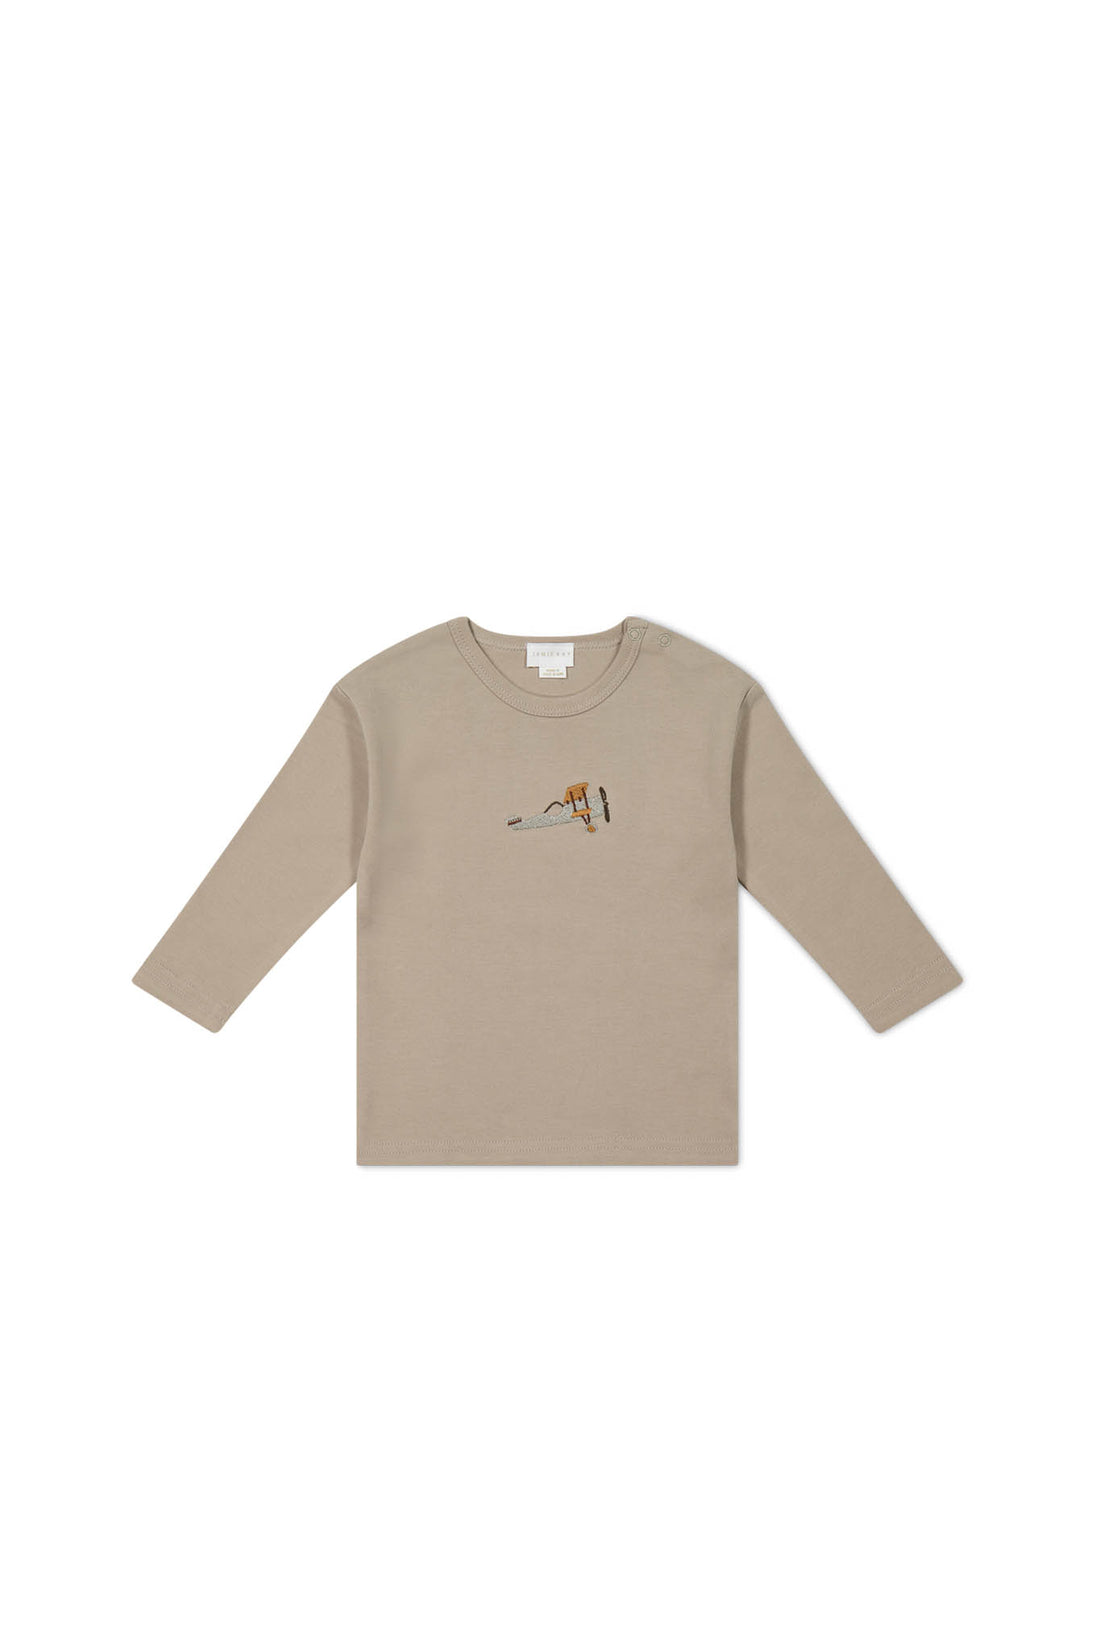 Pima Cotton Arnold Long Sleeve Top - Vintage Taupe Avion Childrens Top from Jamie Kay NZ